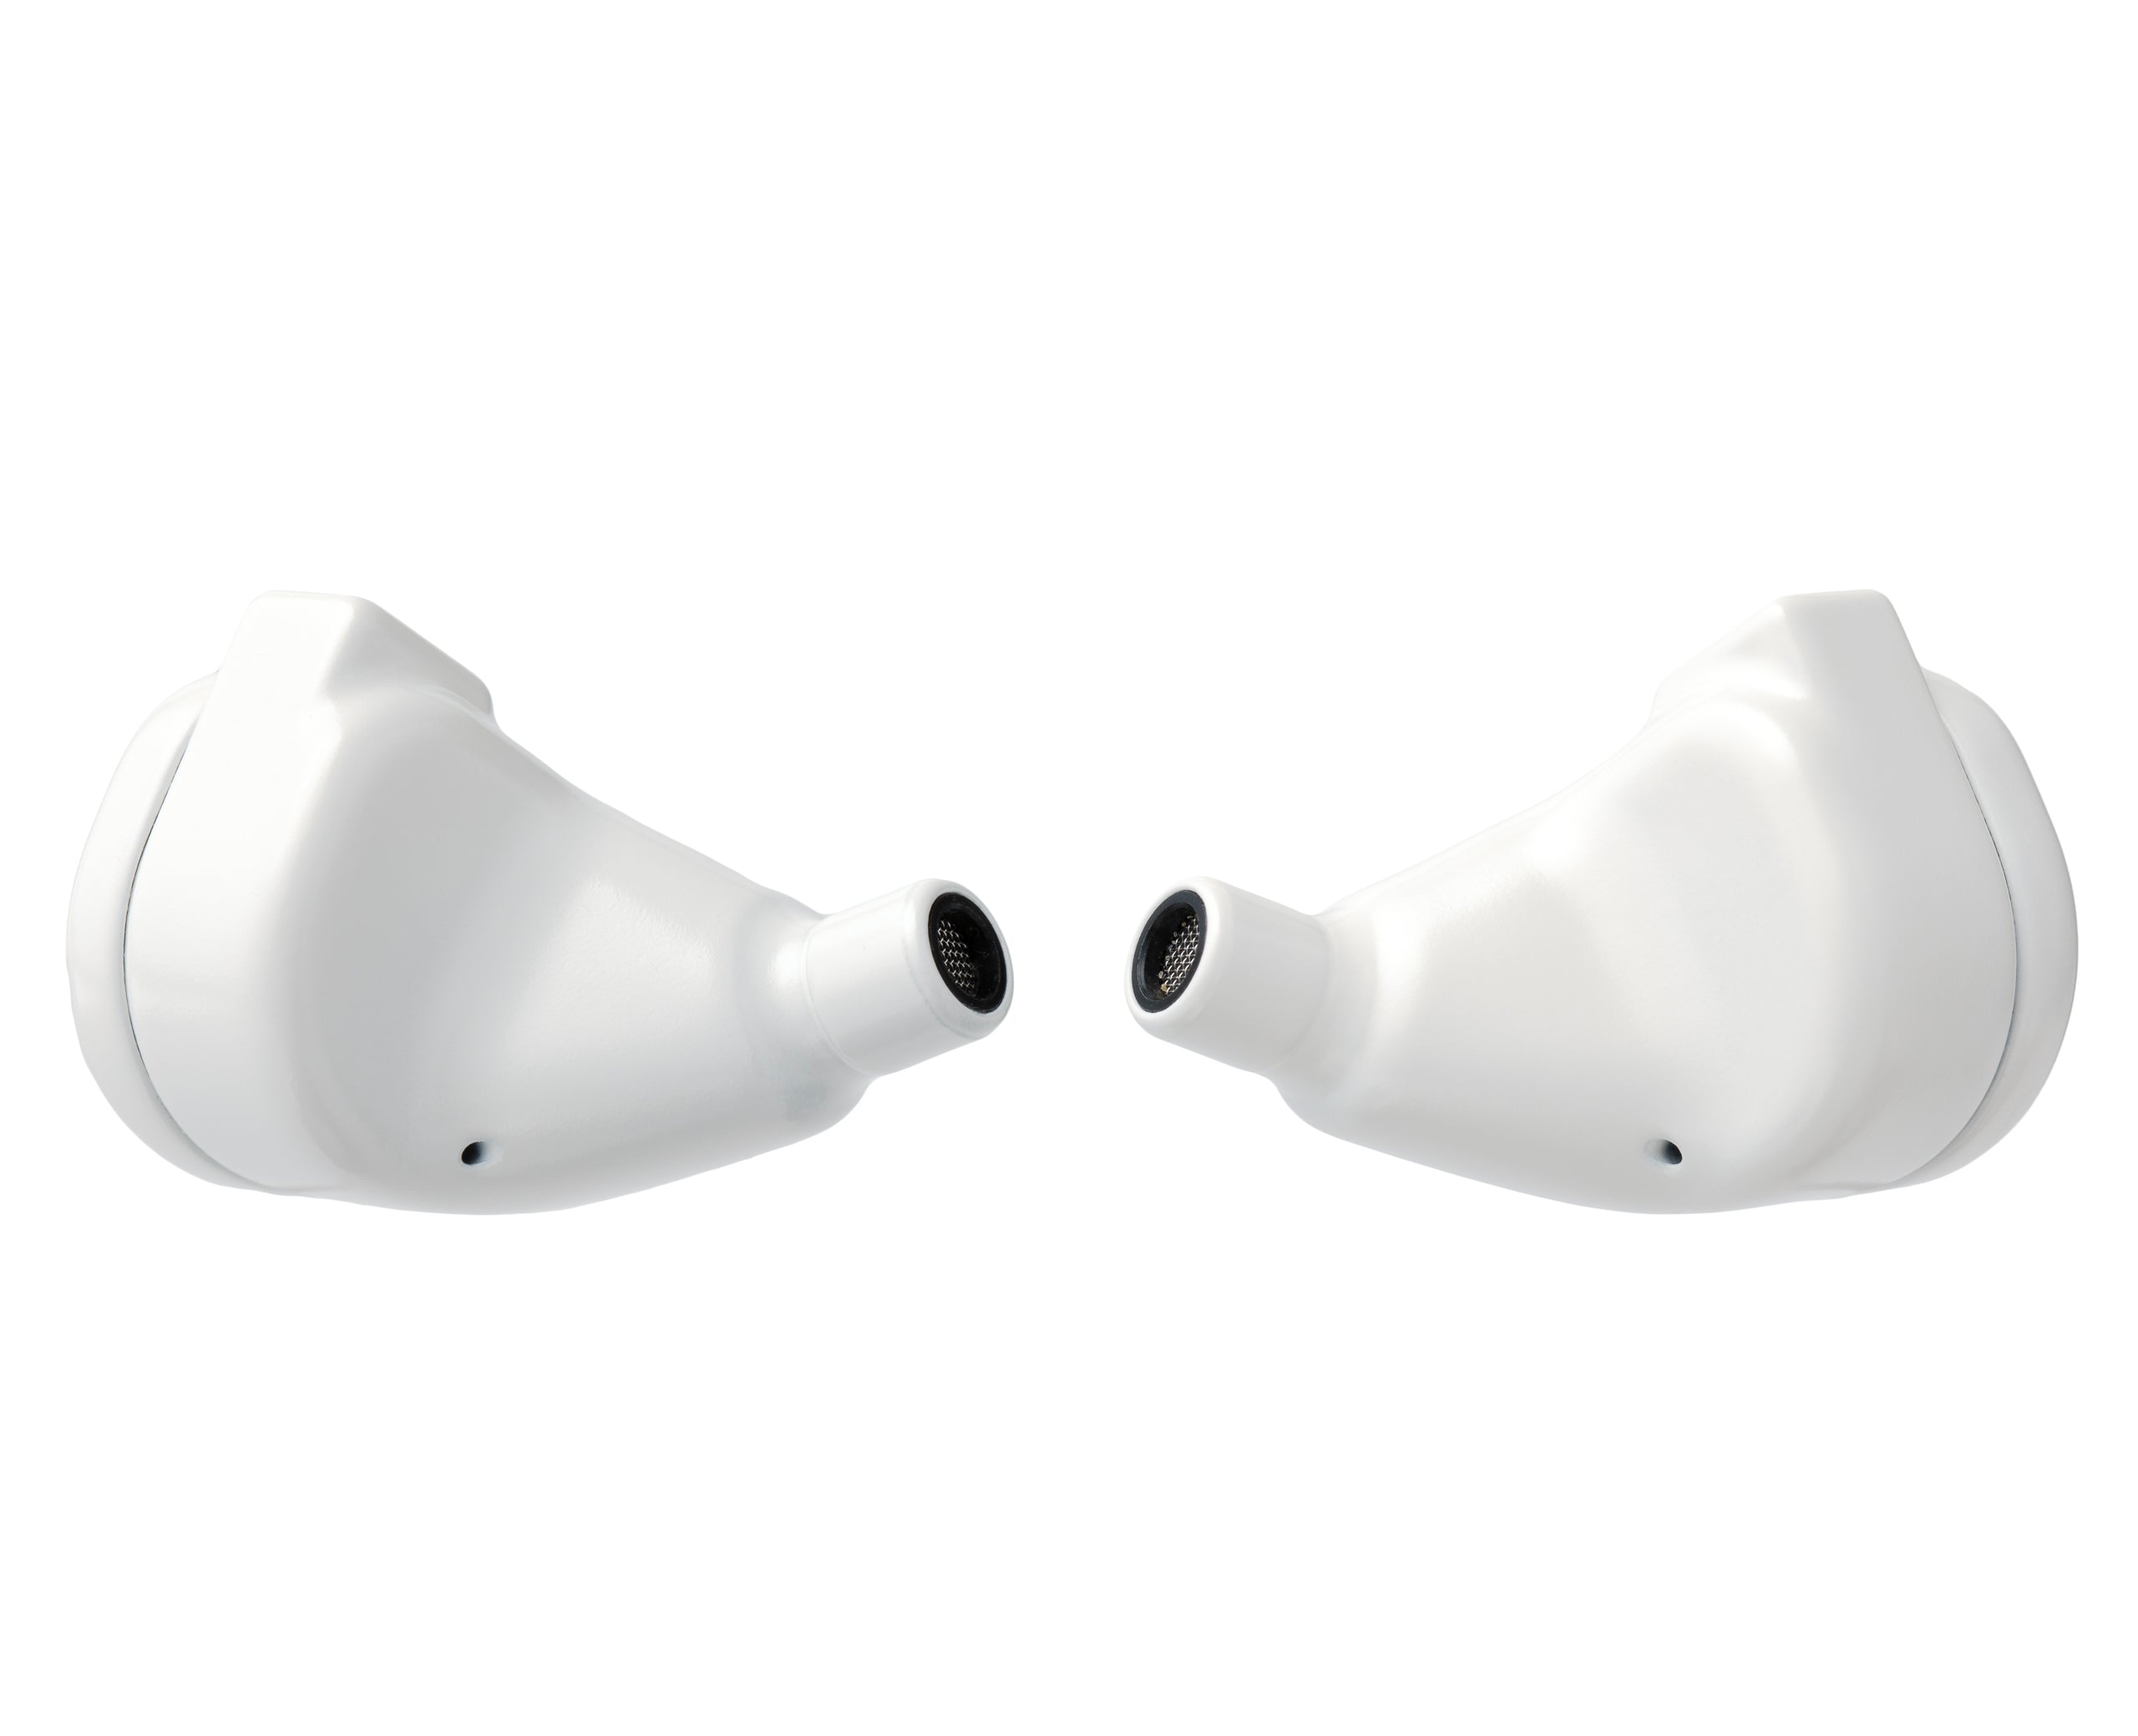 Fourté Blanc Four Driver Universal In-Ear Monitor 64 Audio